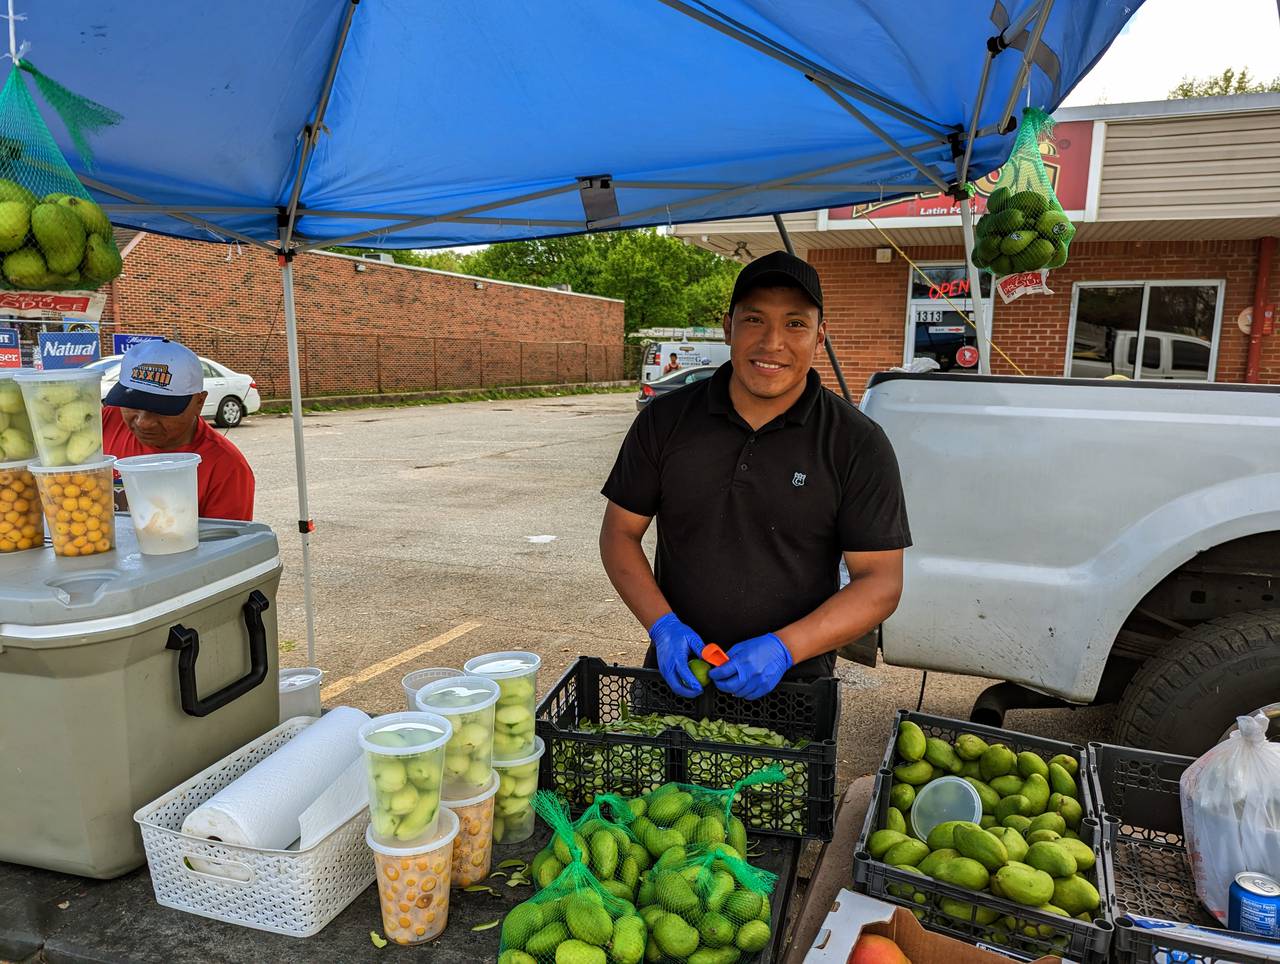 Mateus cuts up green mangos for sale outside a small tienda and laundry on Forest Drive, where some neighborhoods are home to the city's Hispanic population.